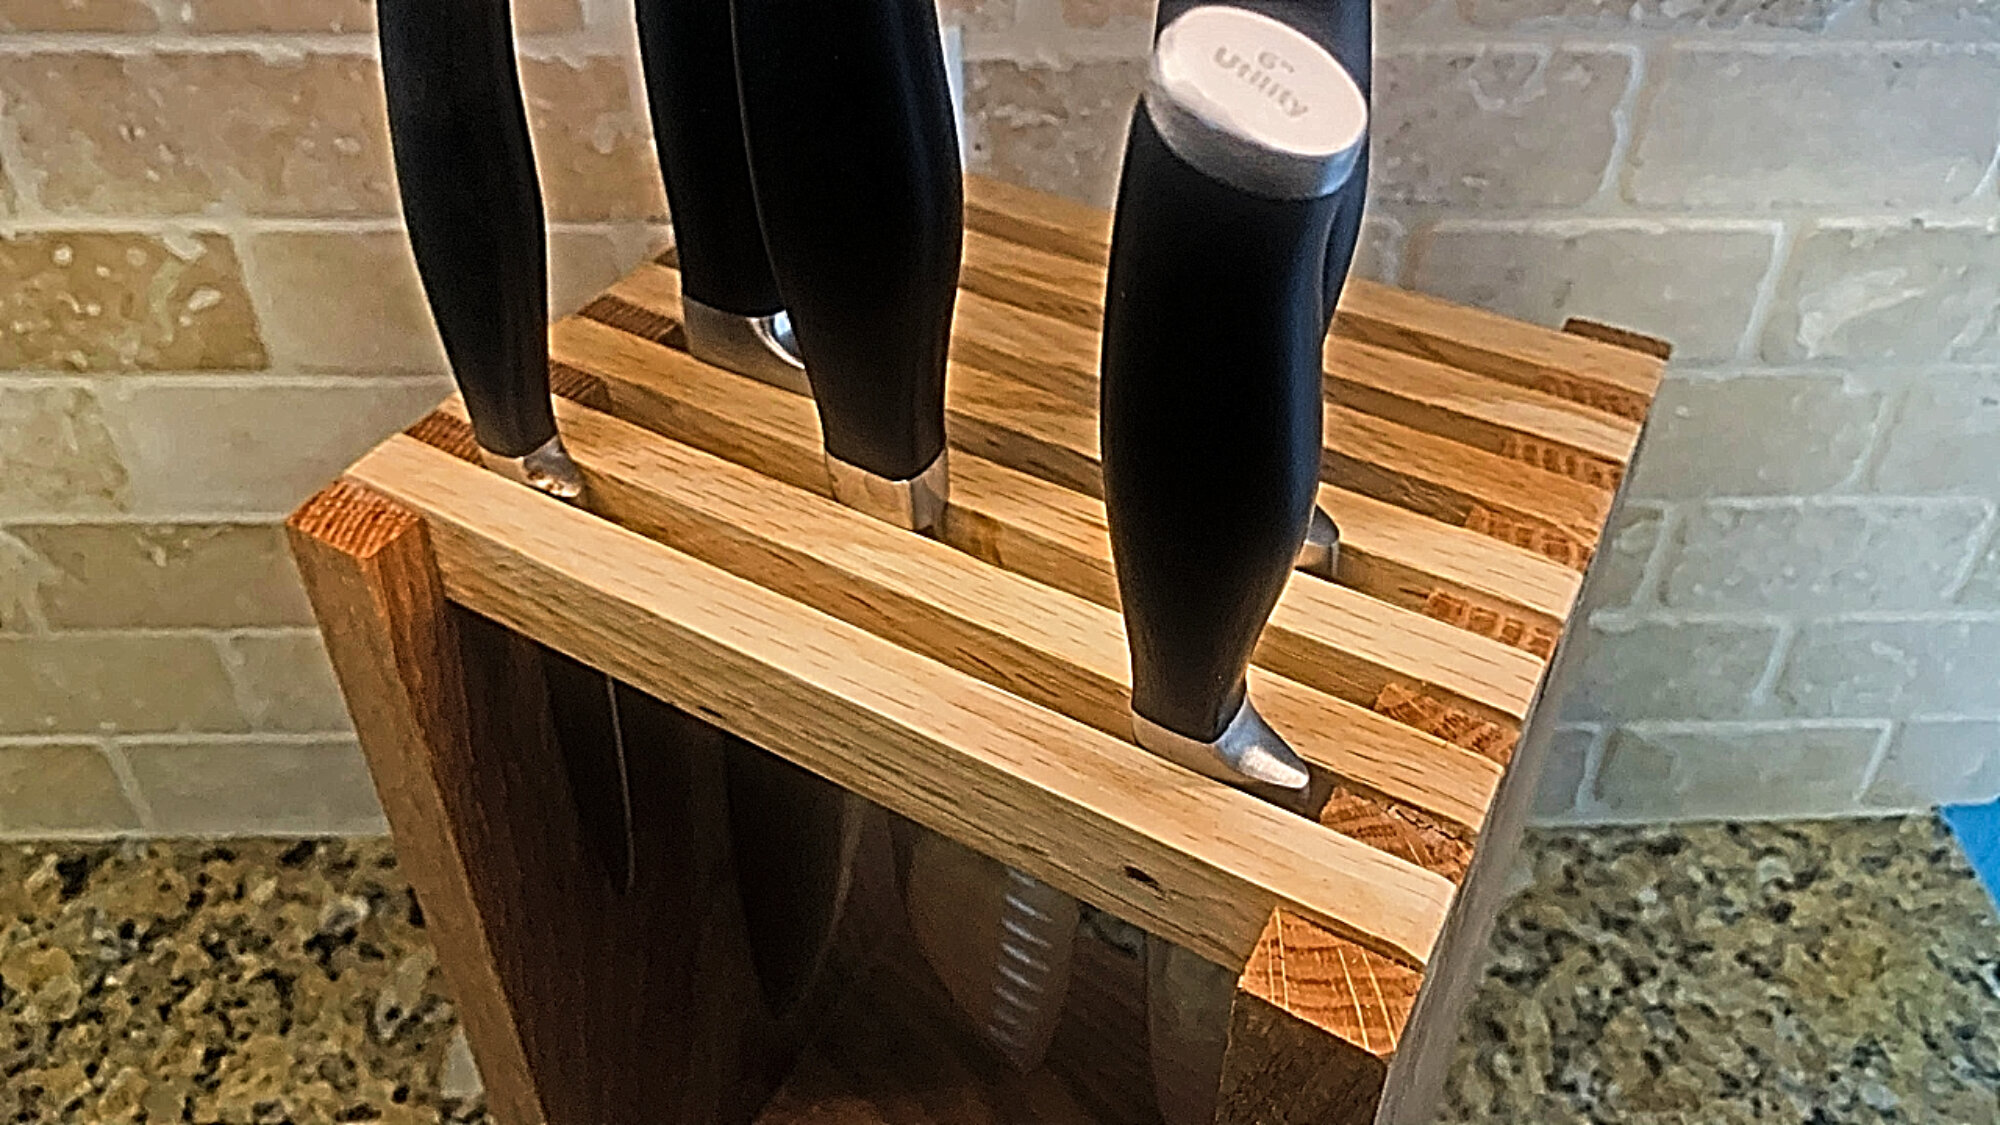 You Should Never Own Enough Knives To Justify A Knife Block